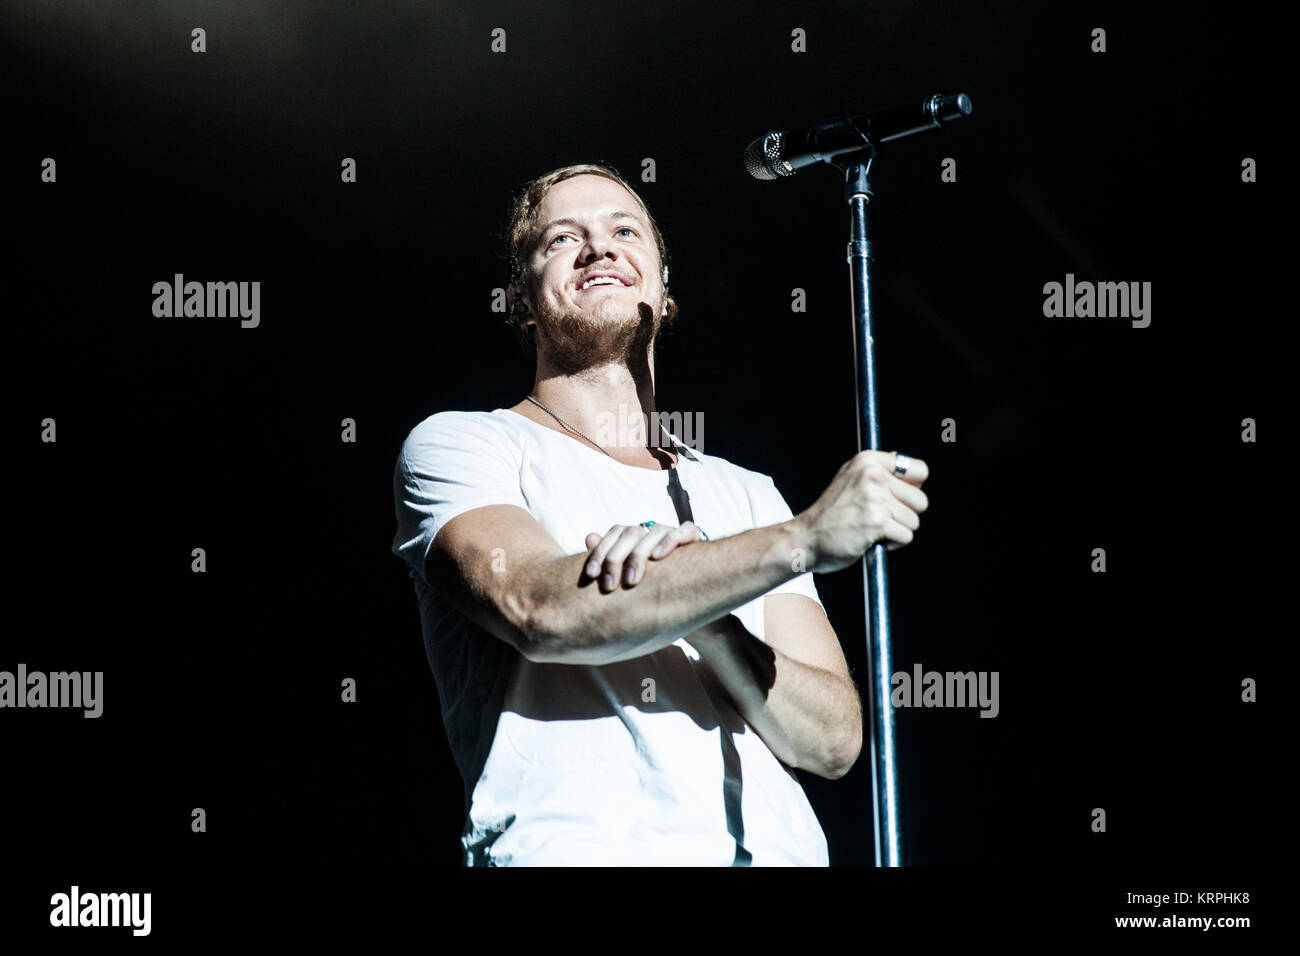 The American rock band Imagine Dragons performs a live concert at Forum in Copenhagen. Here lead singer Dan Reynolds is seen live on stage. Denmark, 19/10 2015. Stock Photo